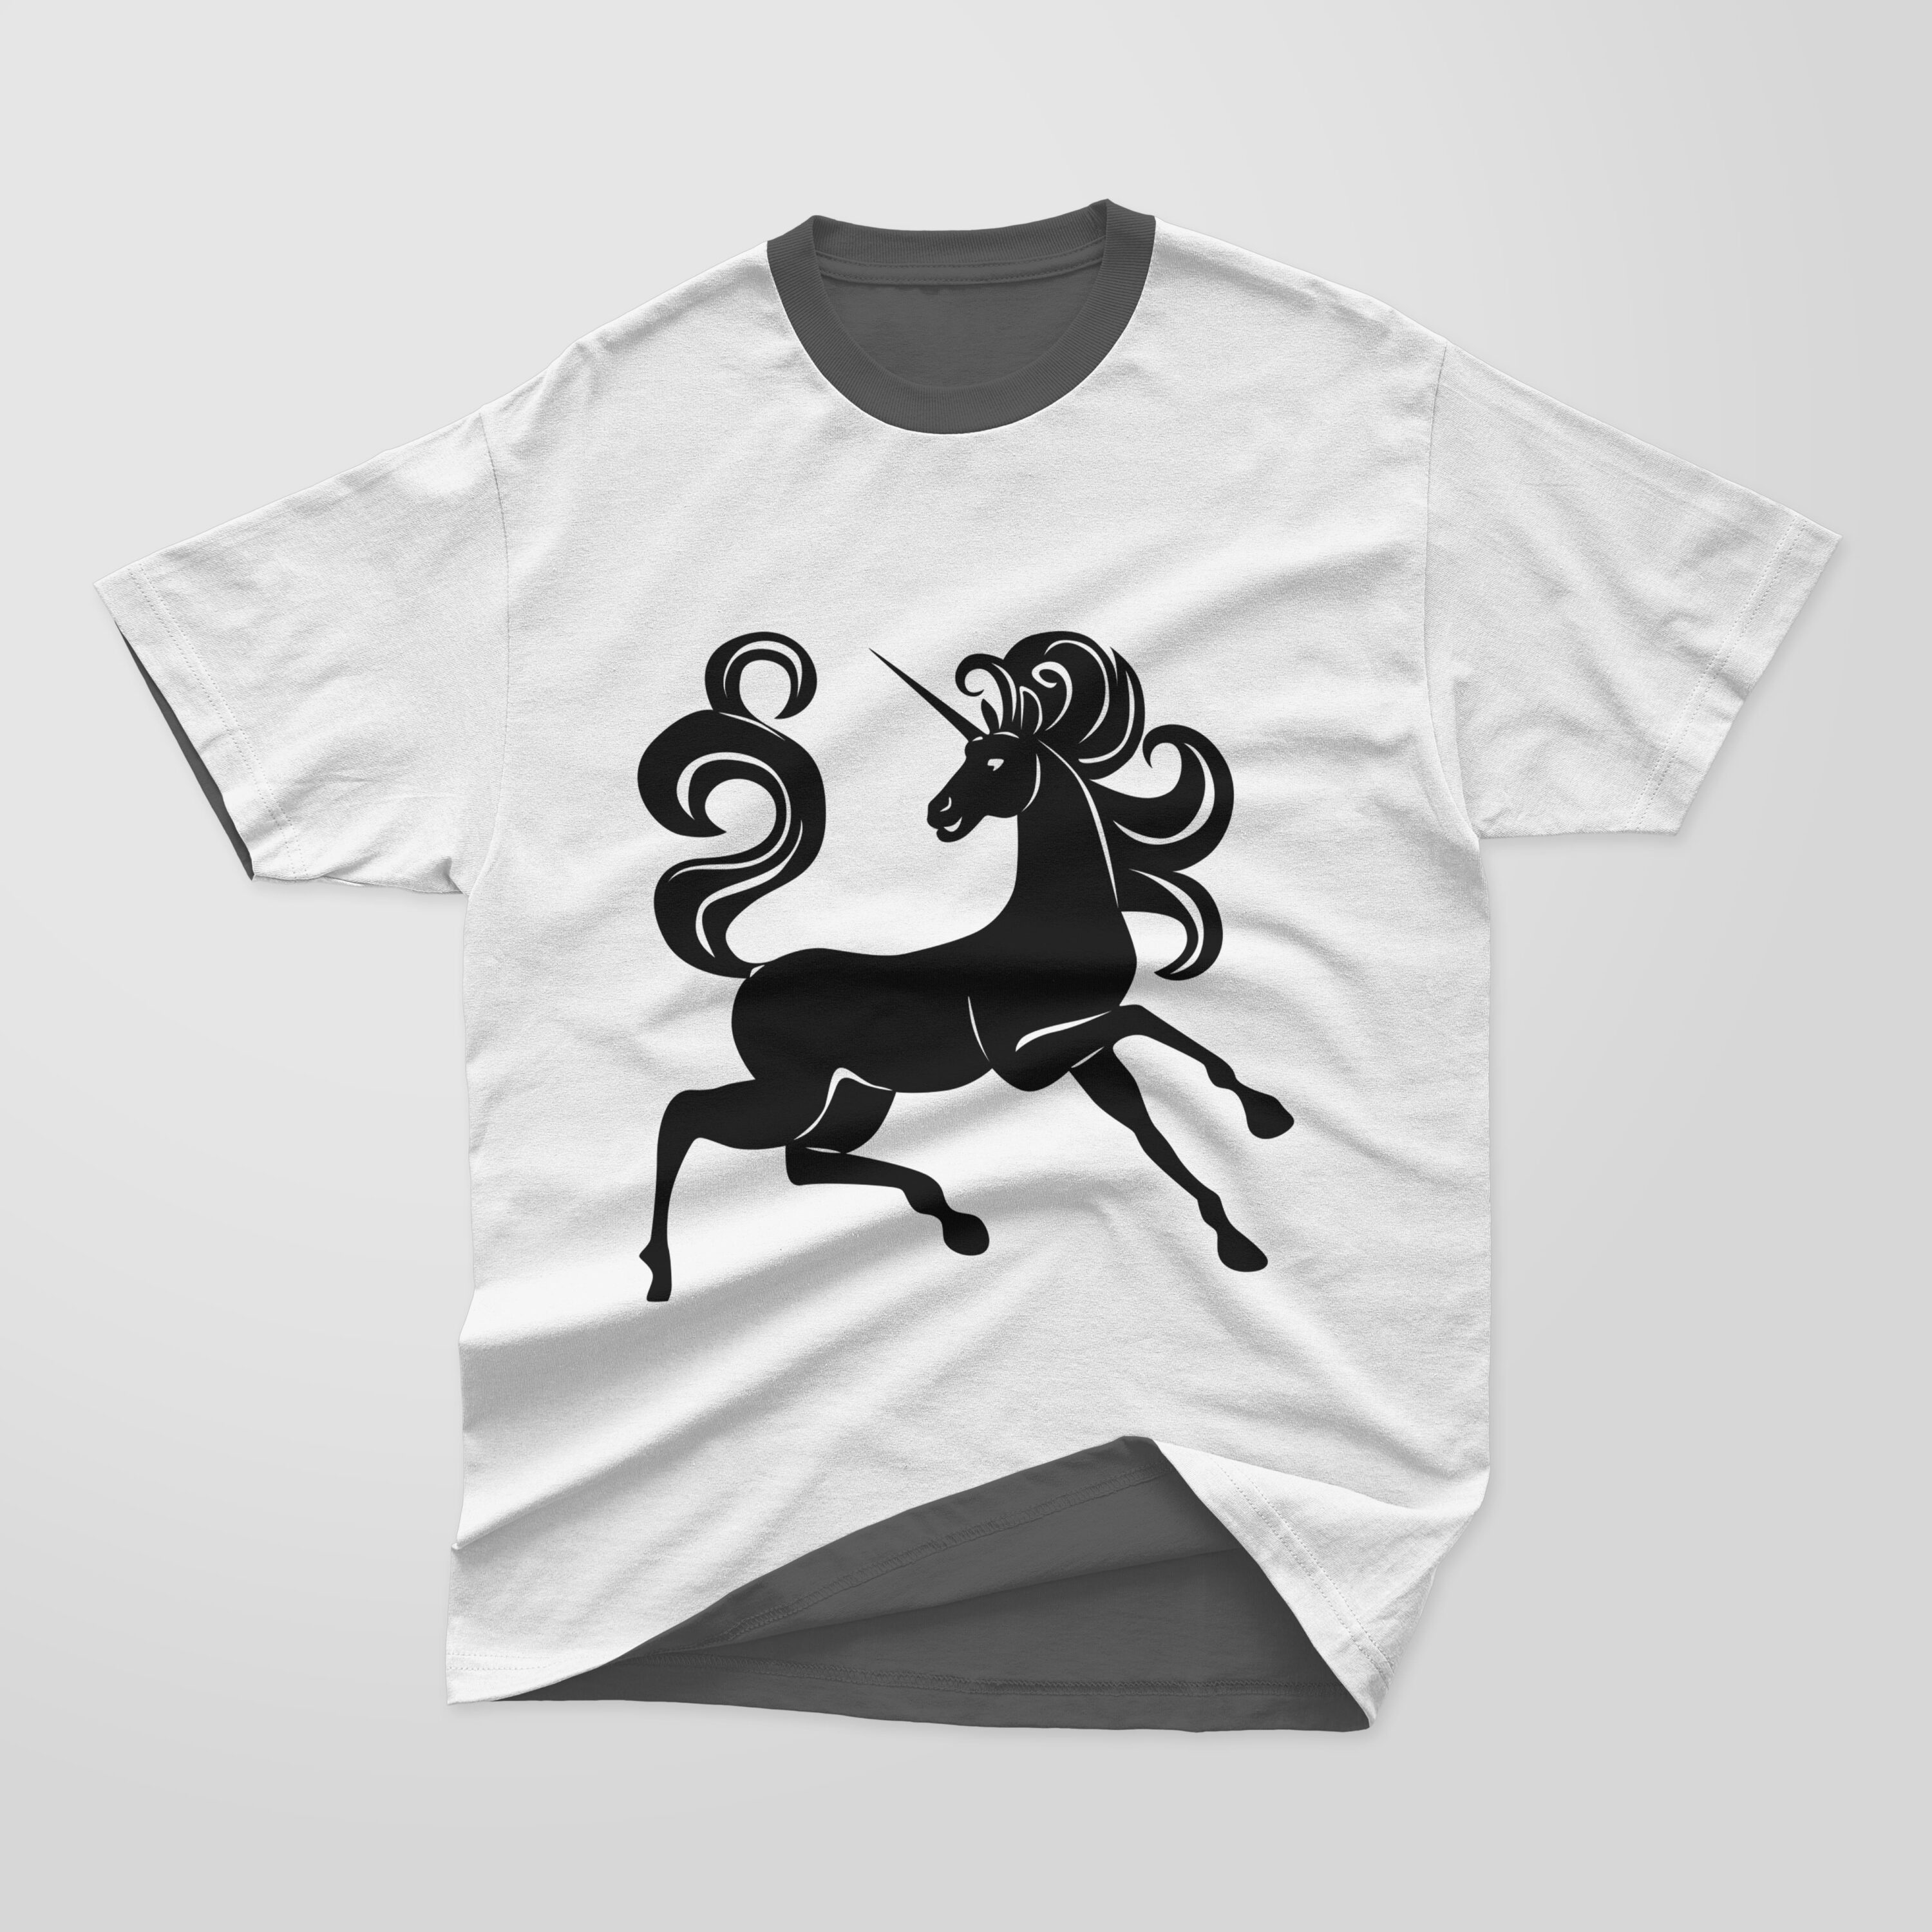 White and dark gray T-shirt with a dark gray collar and a black silhouette of a unicorn on a gray background.